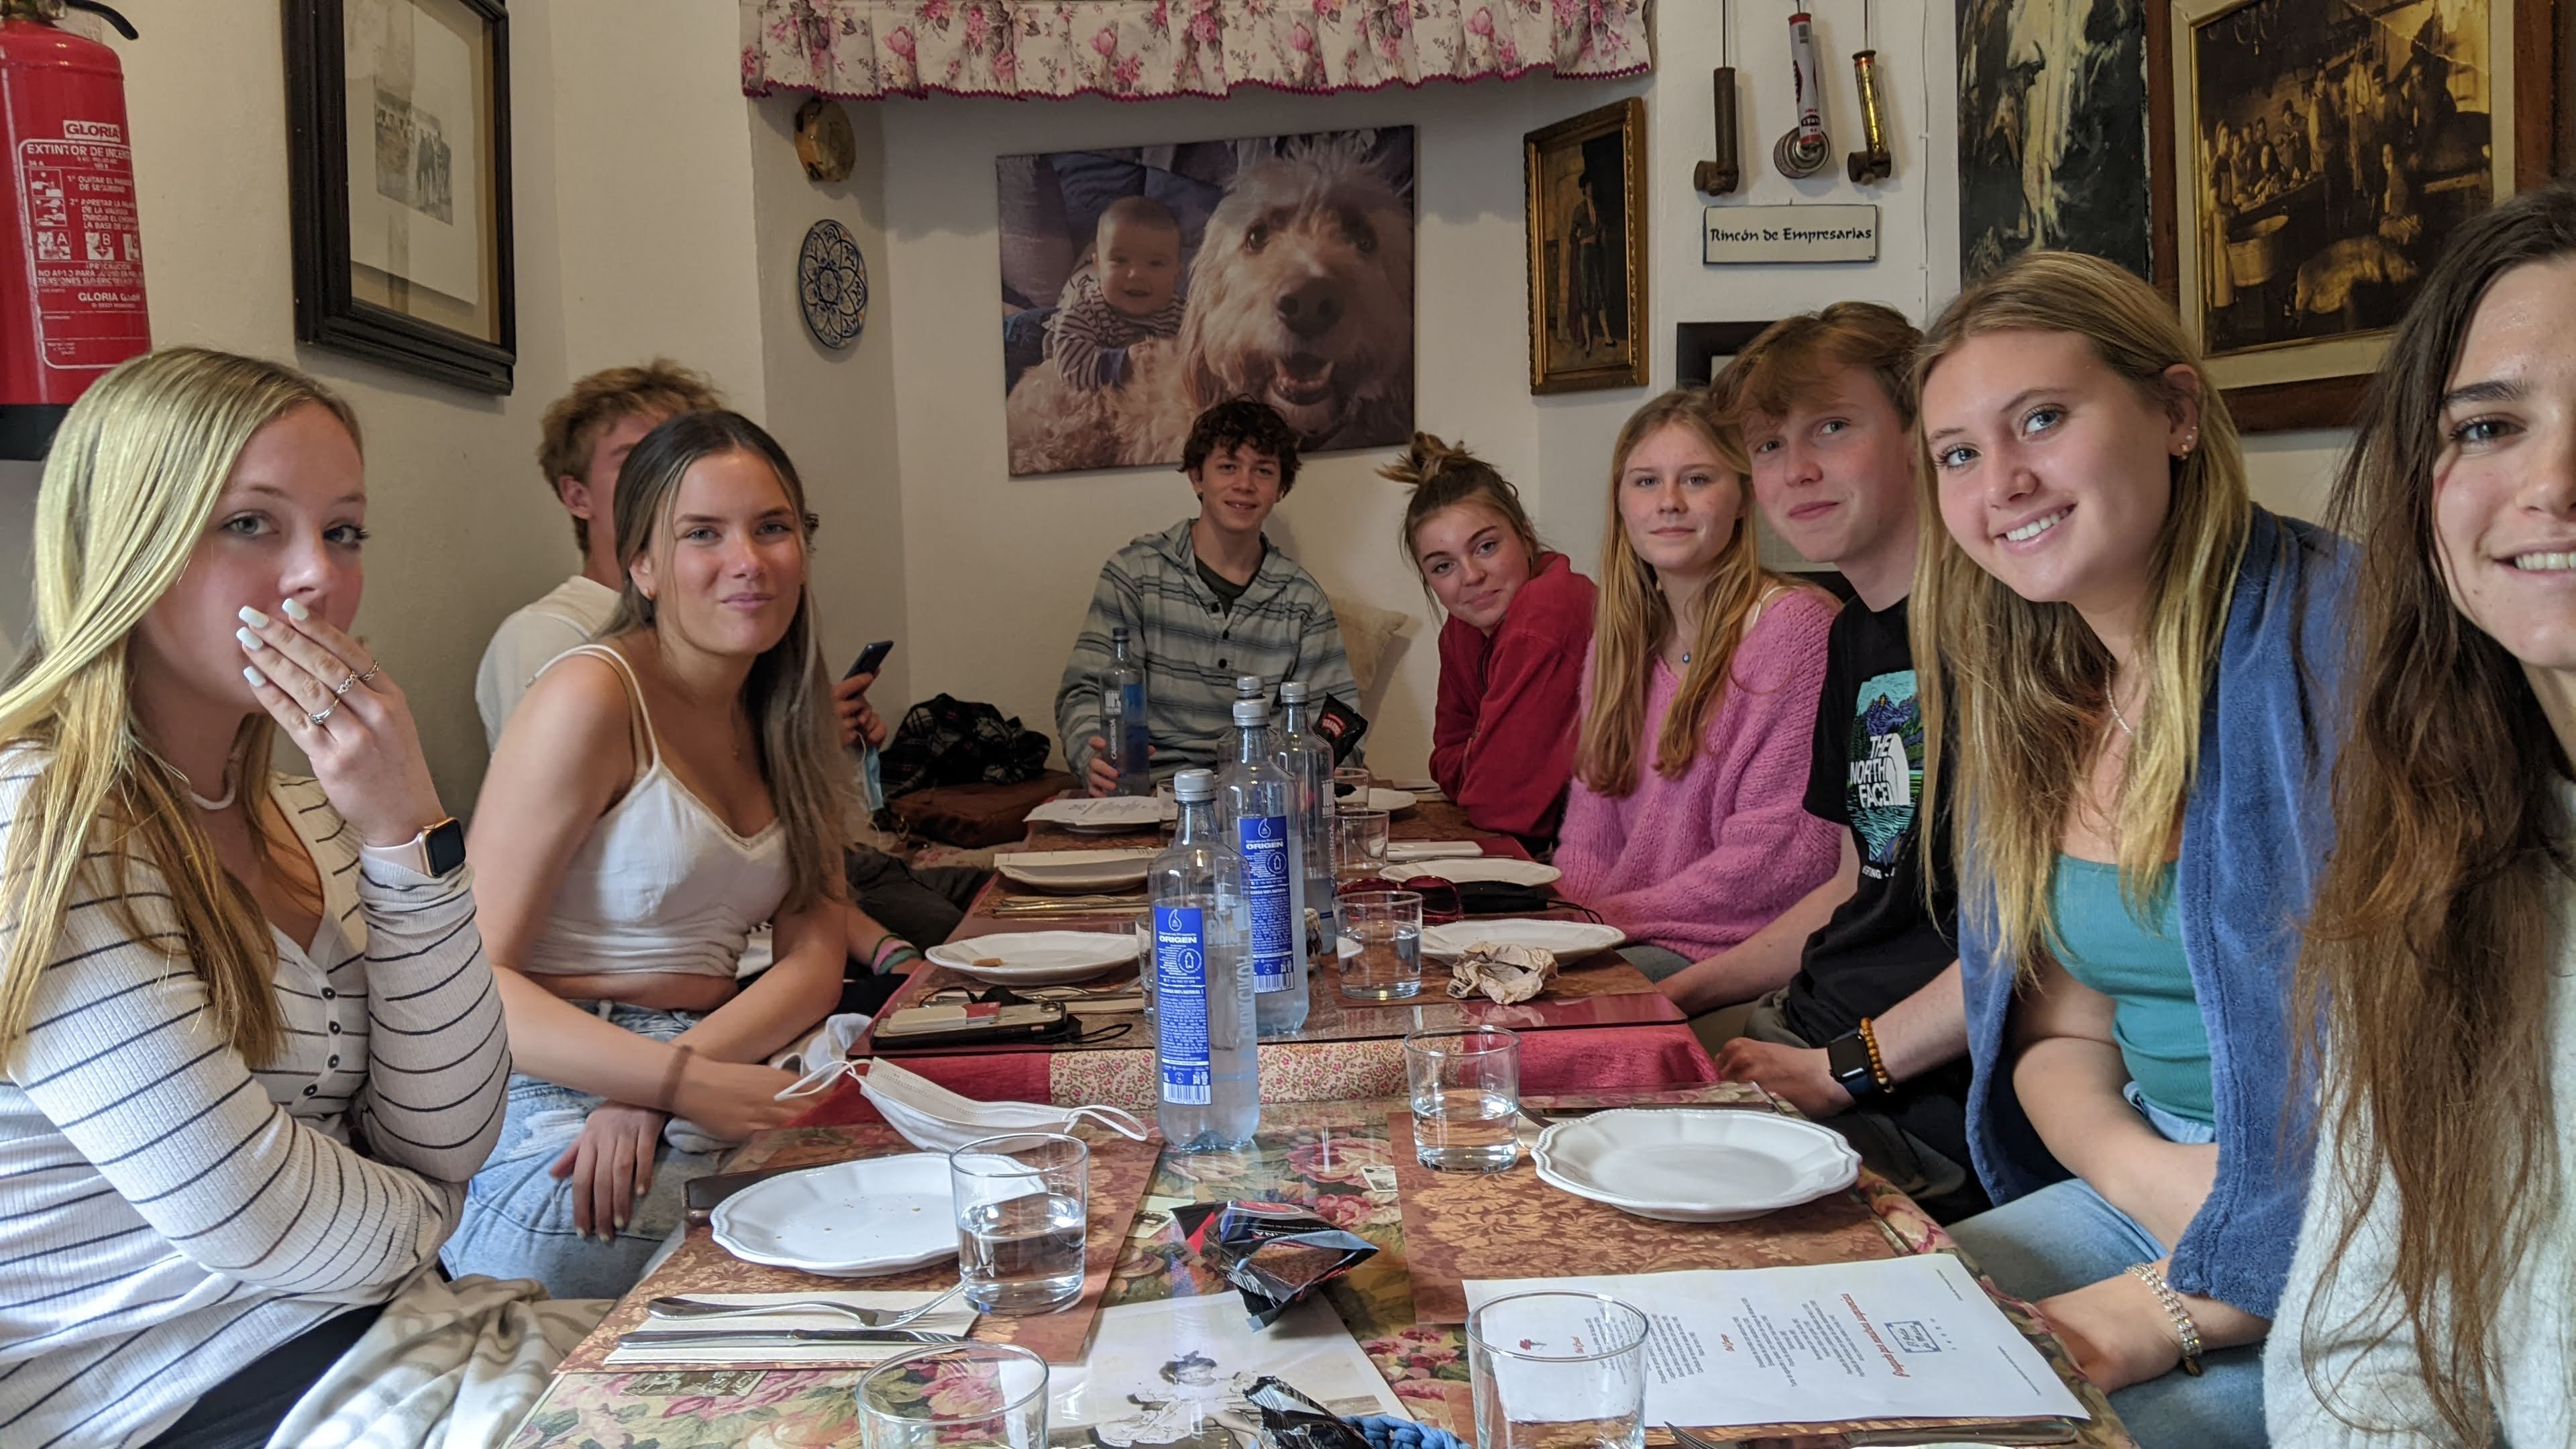 Proctor en Segovia learns placed-based learning about Andalucian food culture and cuisine